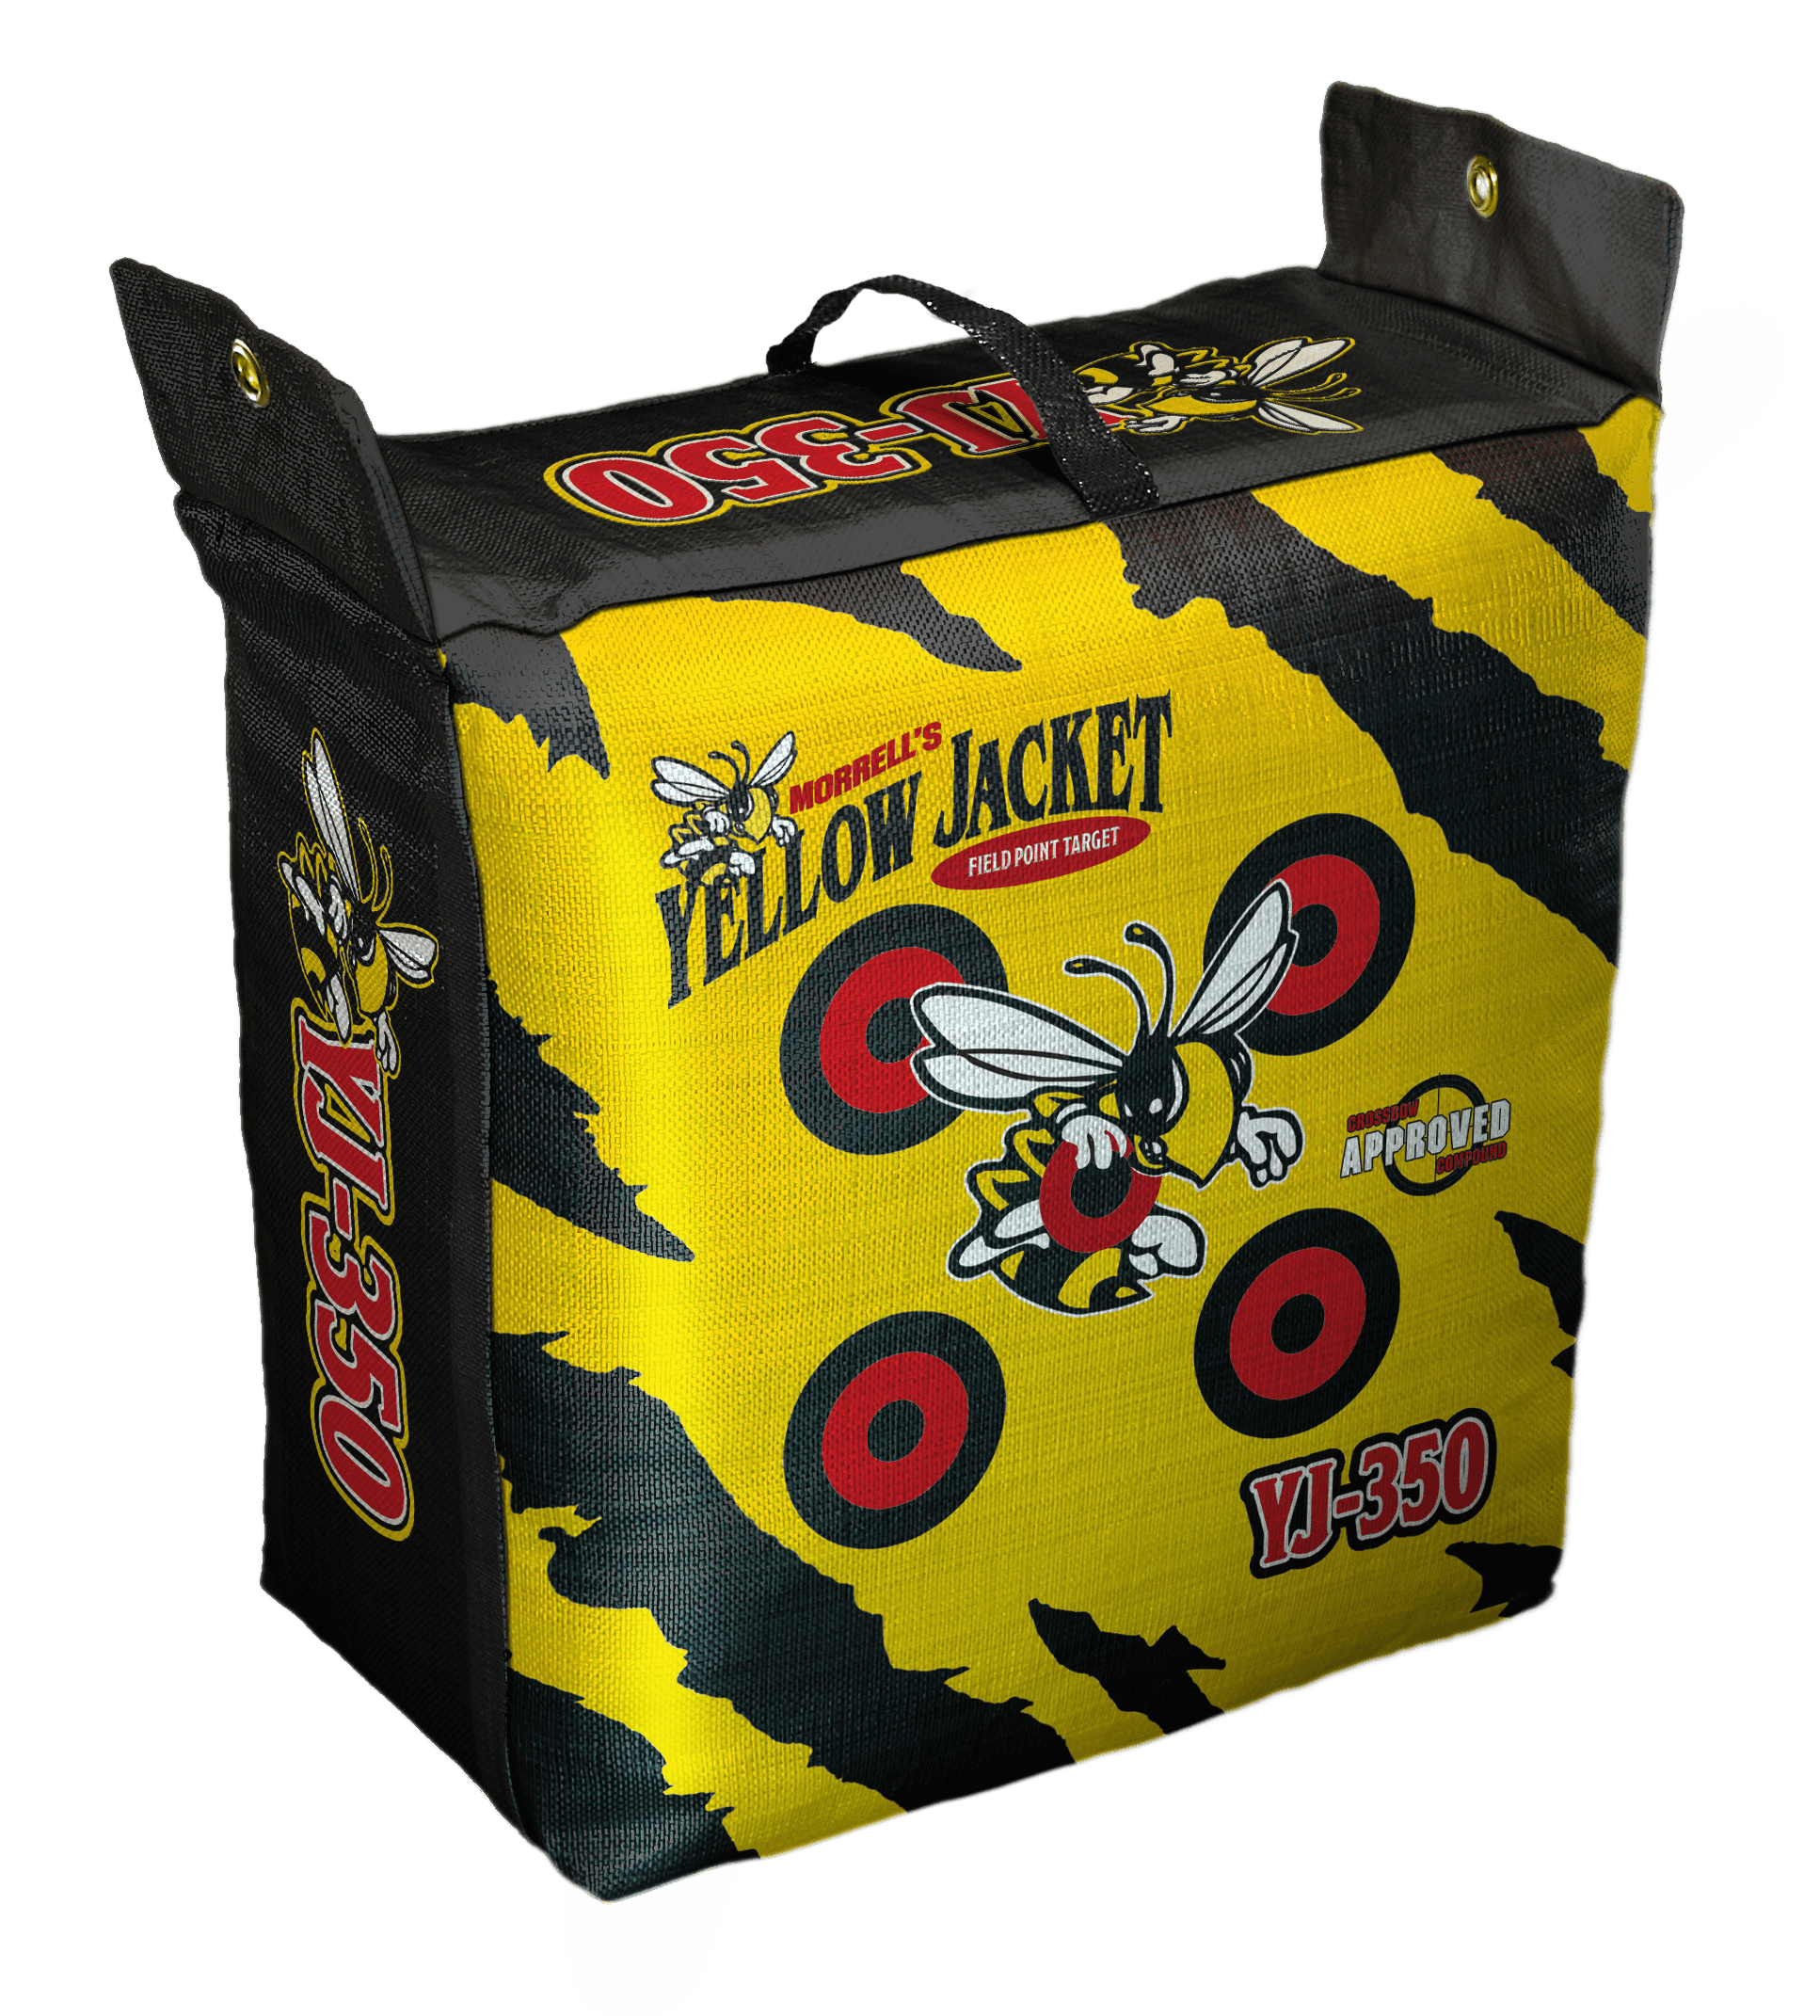 Yellow Jacket Field Point Target Bag Crossbow Compound Bow Archery Arrow 